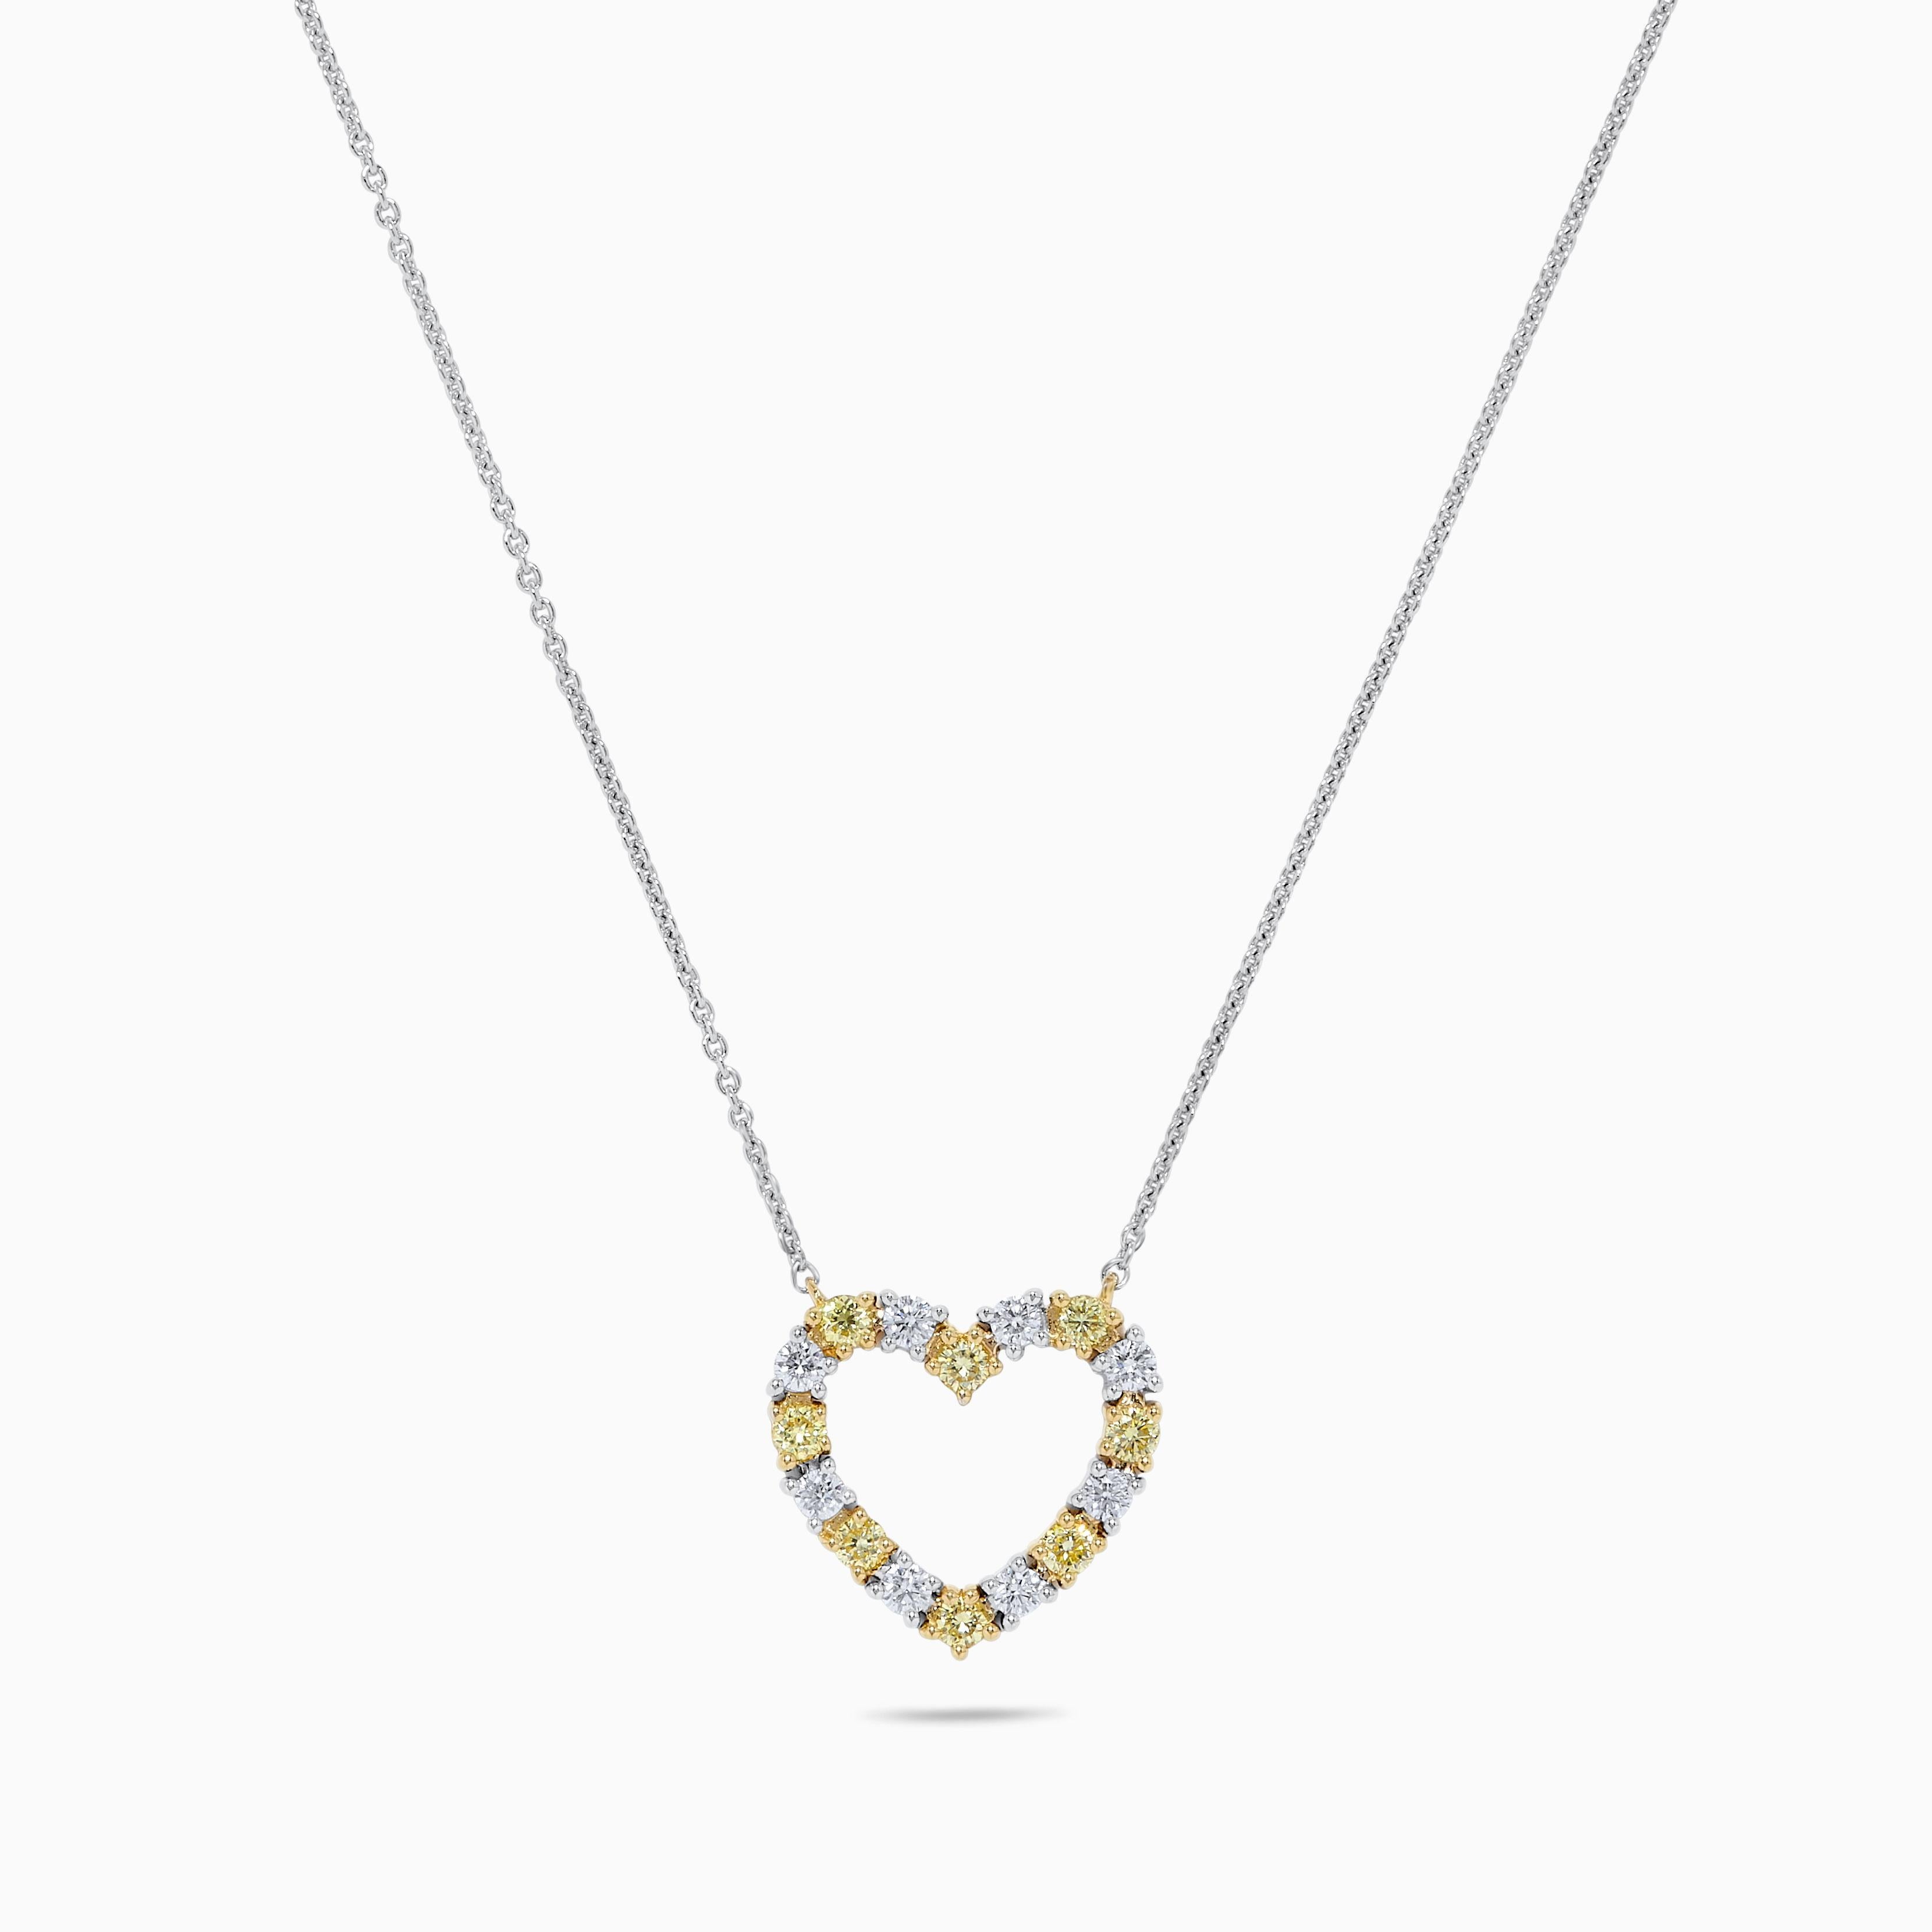 RareGemWorld's classic diamond necklace. Mounted in a beautiful 18K Yellow and White Gold setting with natural round yellow diamond melee complimented by natural round white diamond melee in a beautiful heart shape. This necklace is guaranteed to